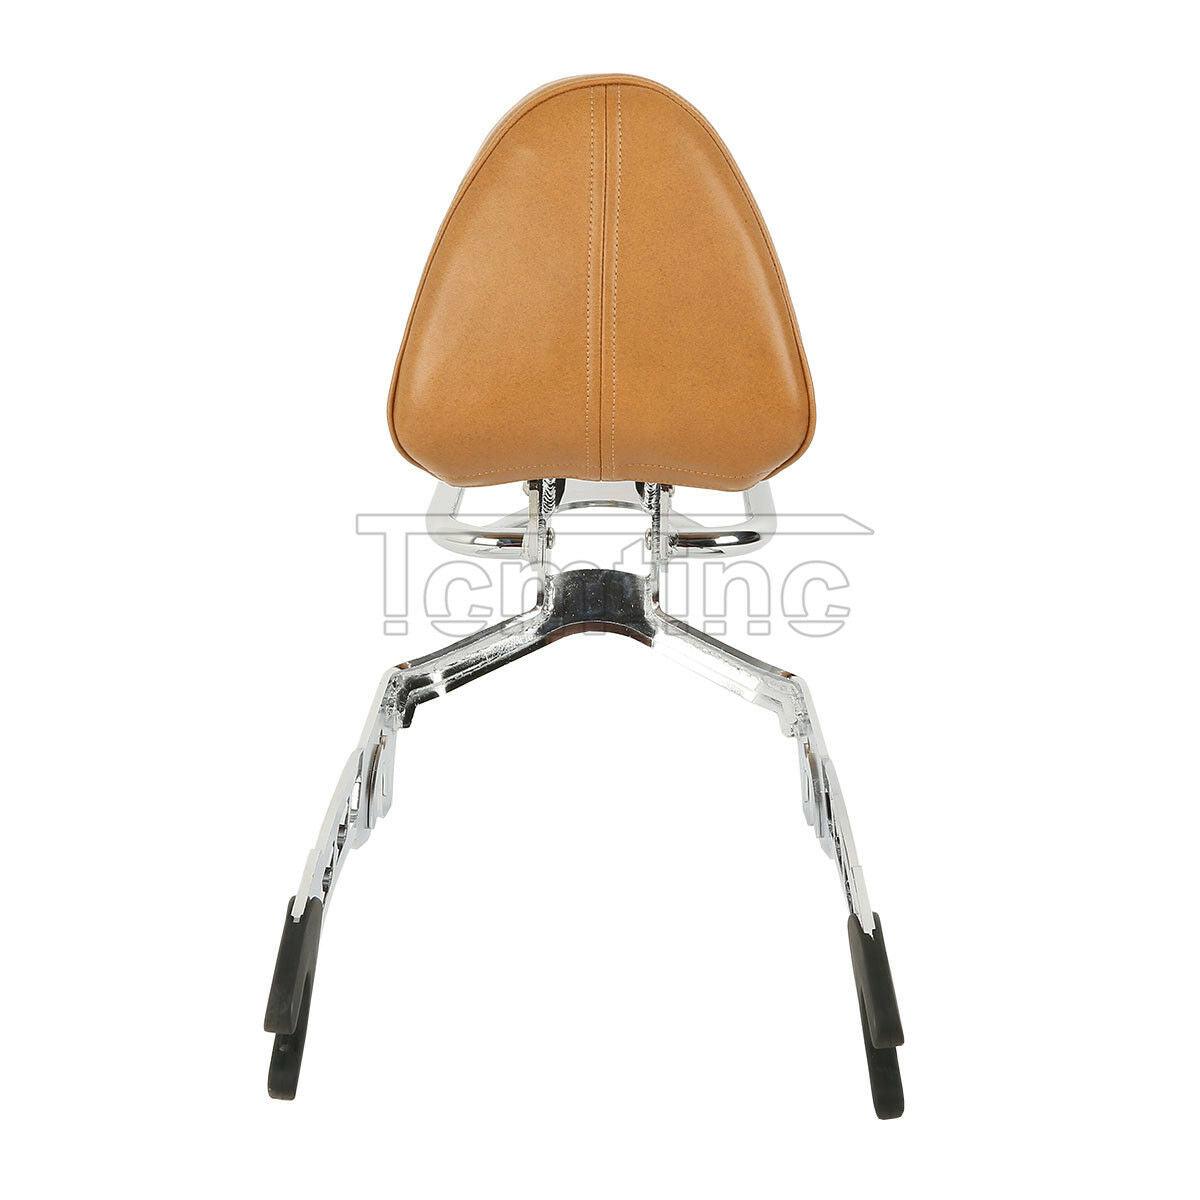 Quick Release Passenger Backrest Sissy Bar Fit For Indian Scout 15-2022 Sixty - Moto Life Products